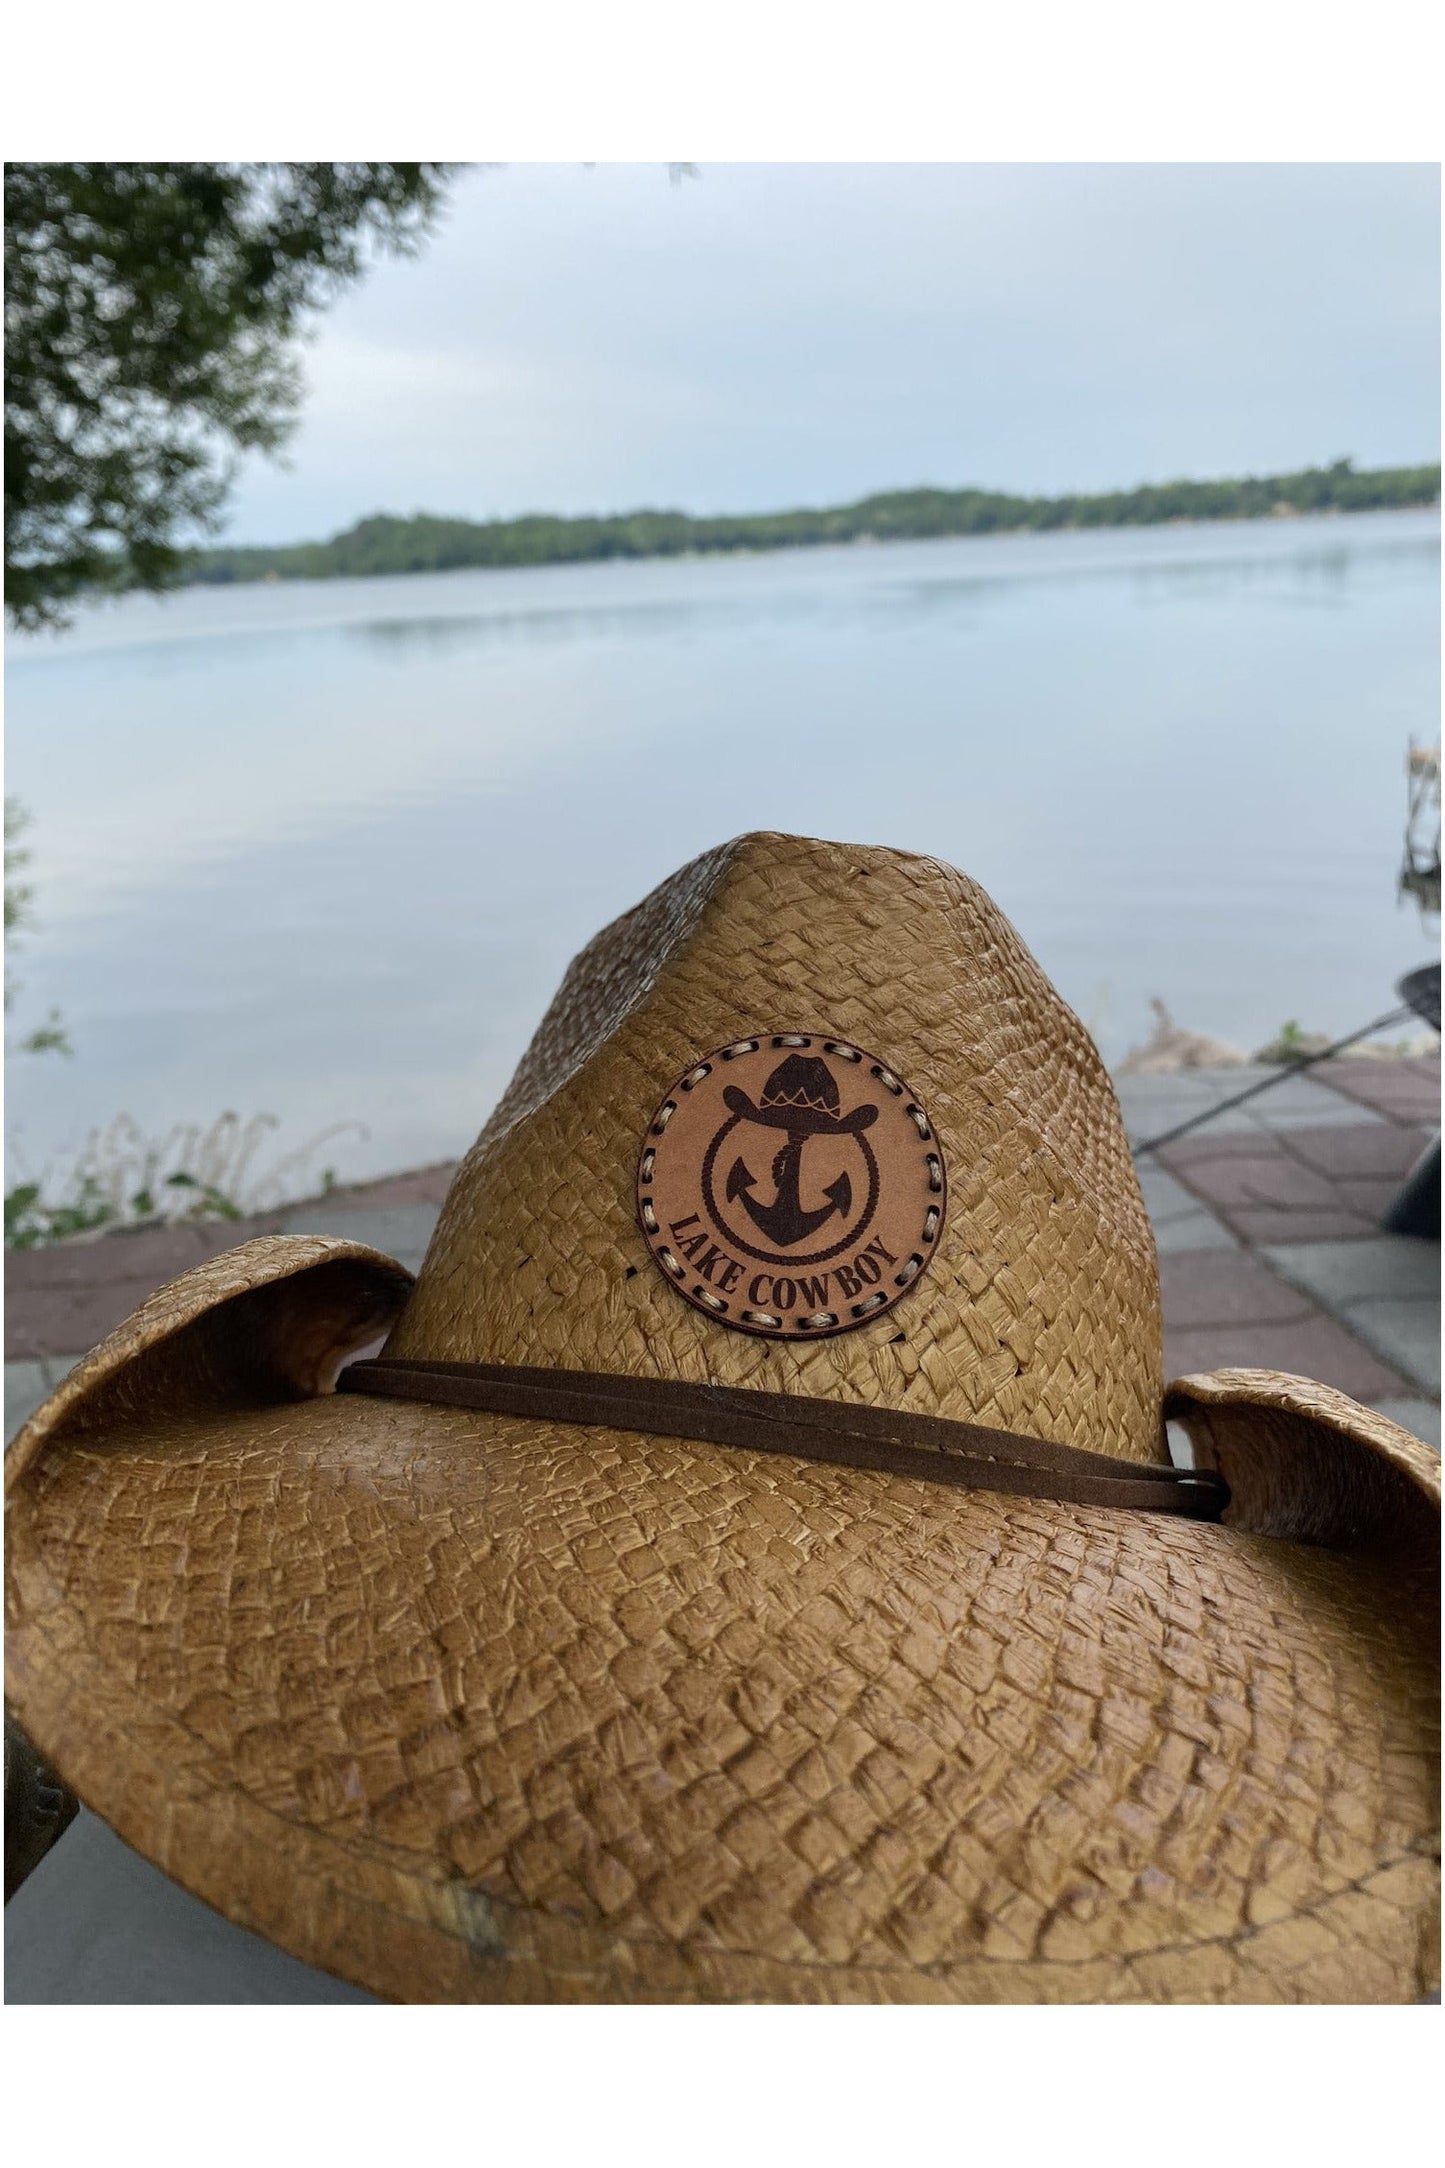 Closeup photo of a Lake Cowboy Signature Cowboy Hat on a patio on Gull Lake in Brainerd, MN